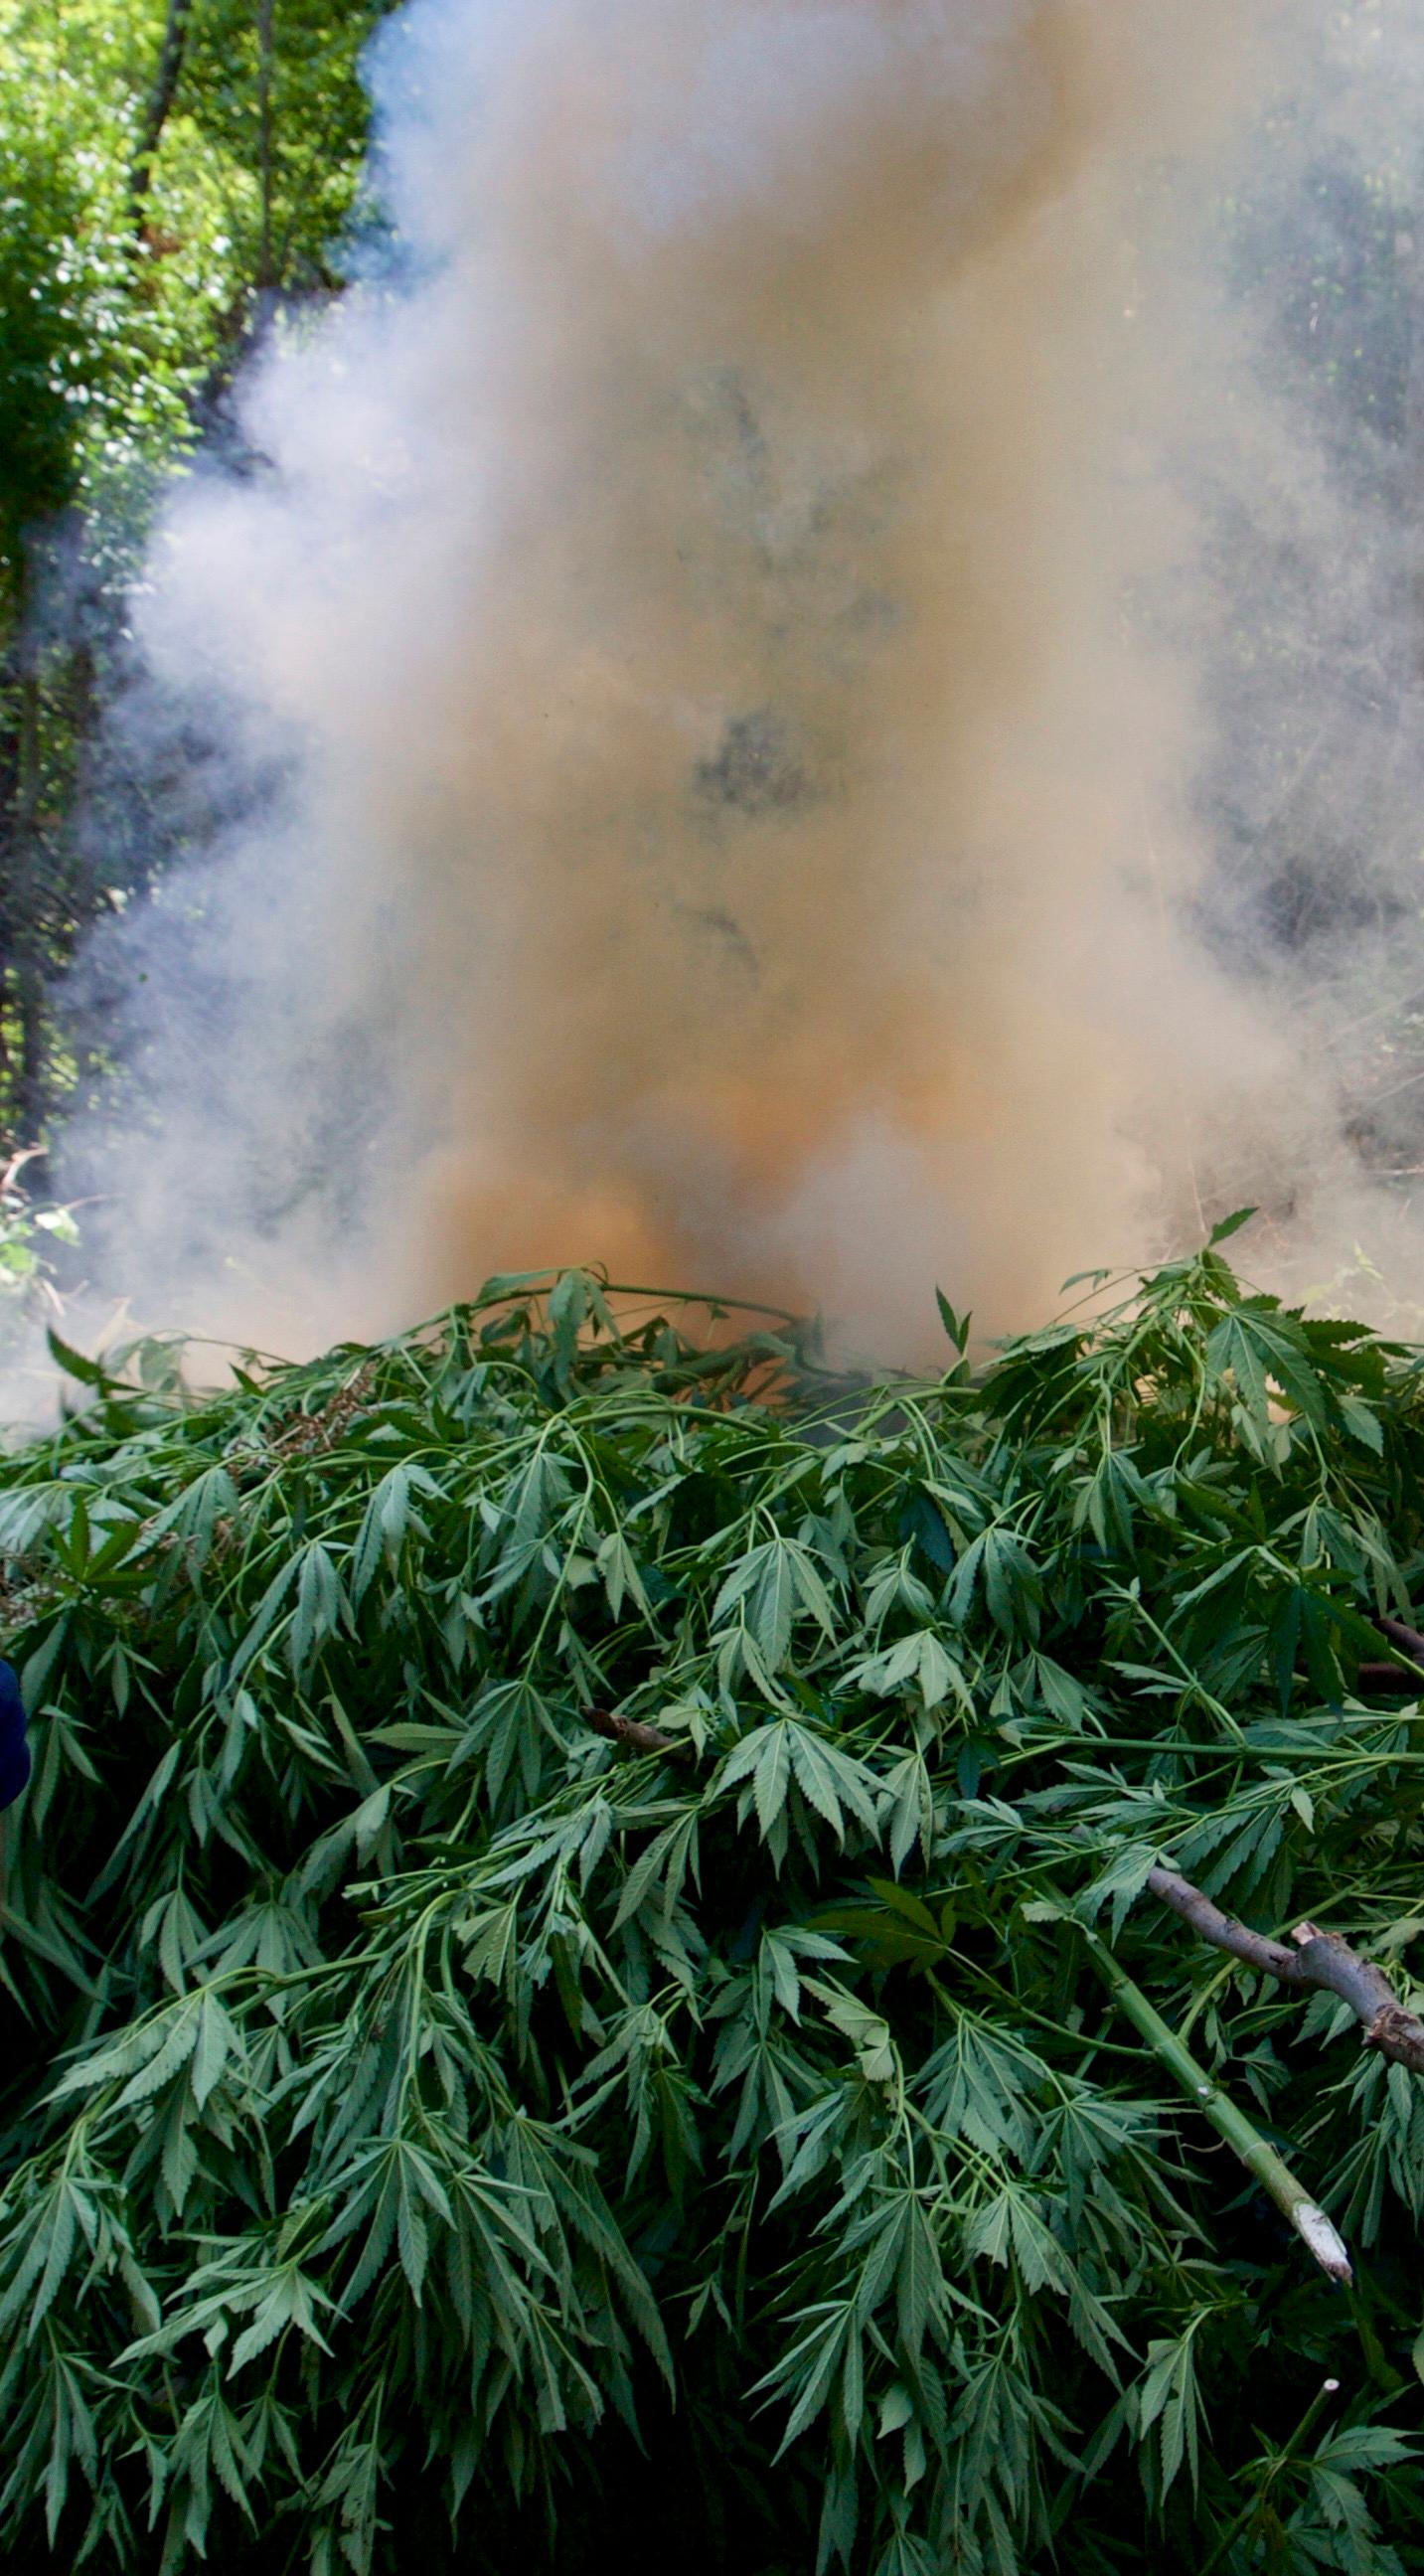 Albania's pot cops cut and burn piles of marijuana plants. But the country remains a major exporter of illegally grown pot.